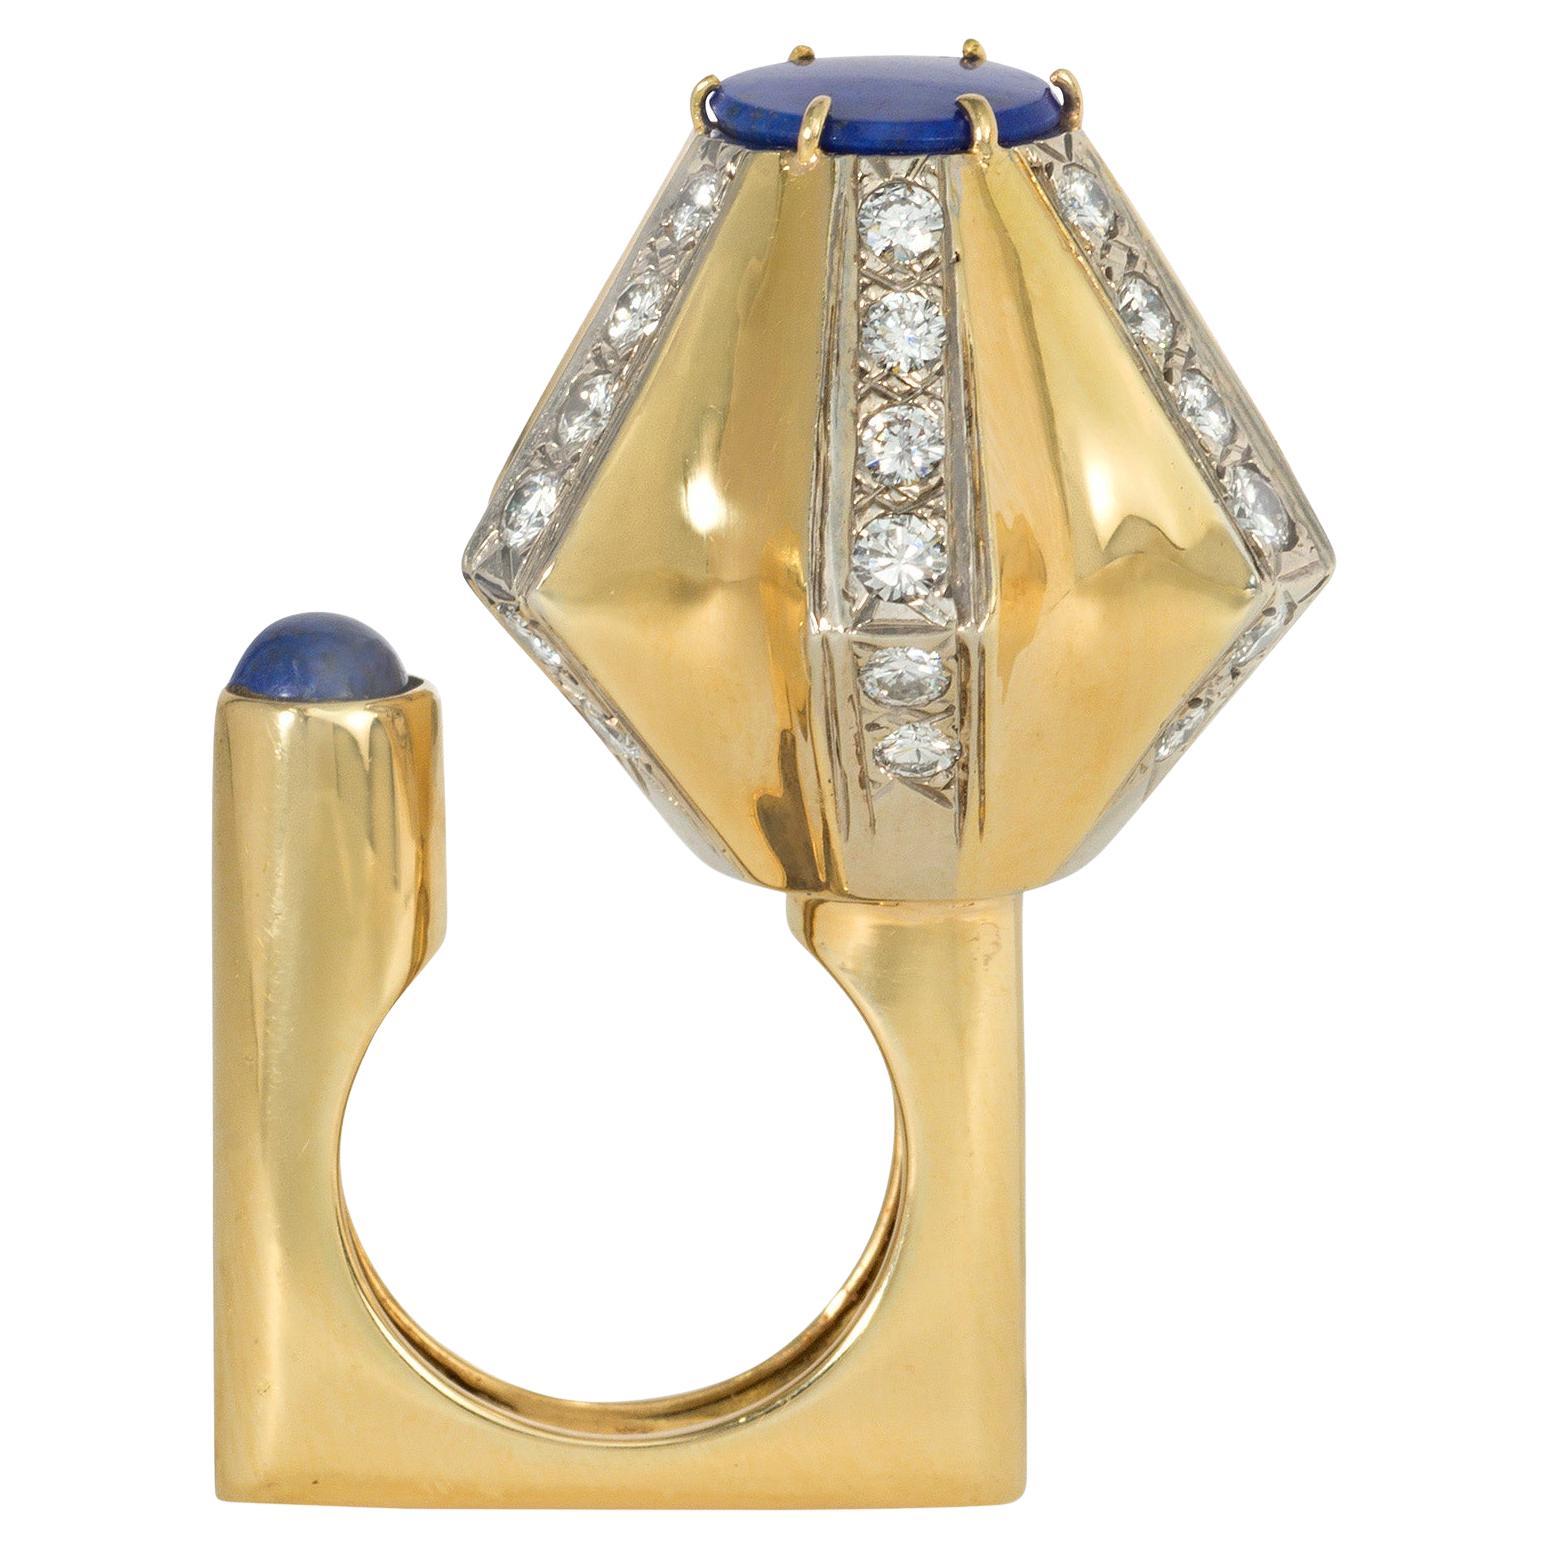 Dinh Van for Cartier 1970s Lapis, Diamond, and Gold Ring of Geometric Design For Sale